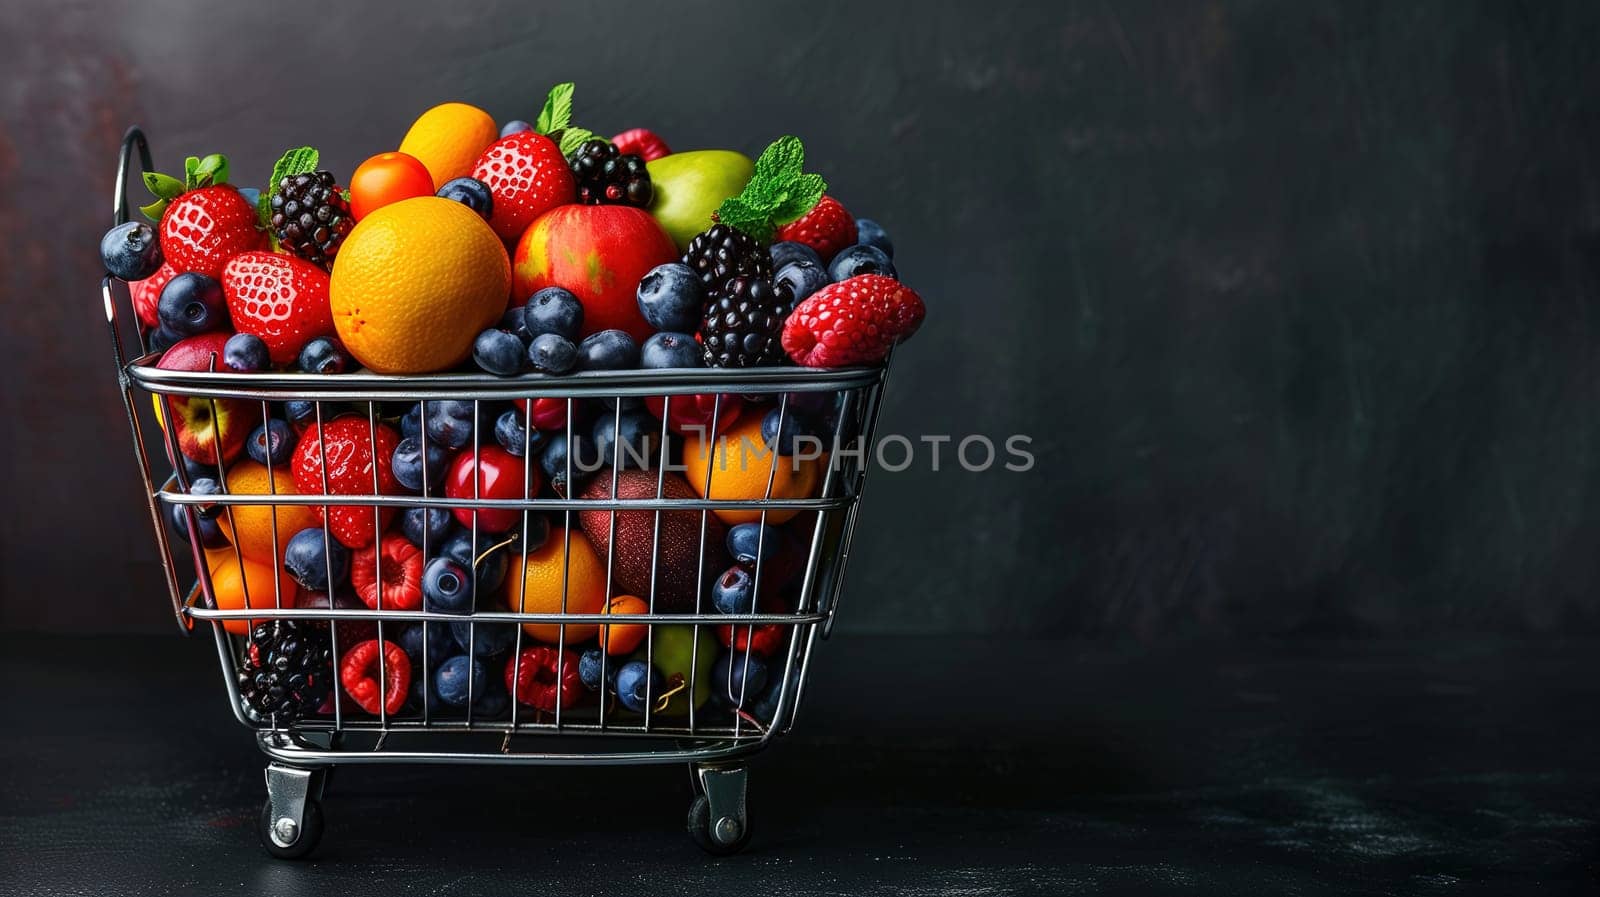 Metal Basket Overflowing With Assorted Fresh Fruit by TRMK